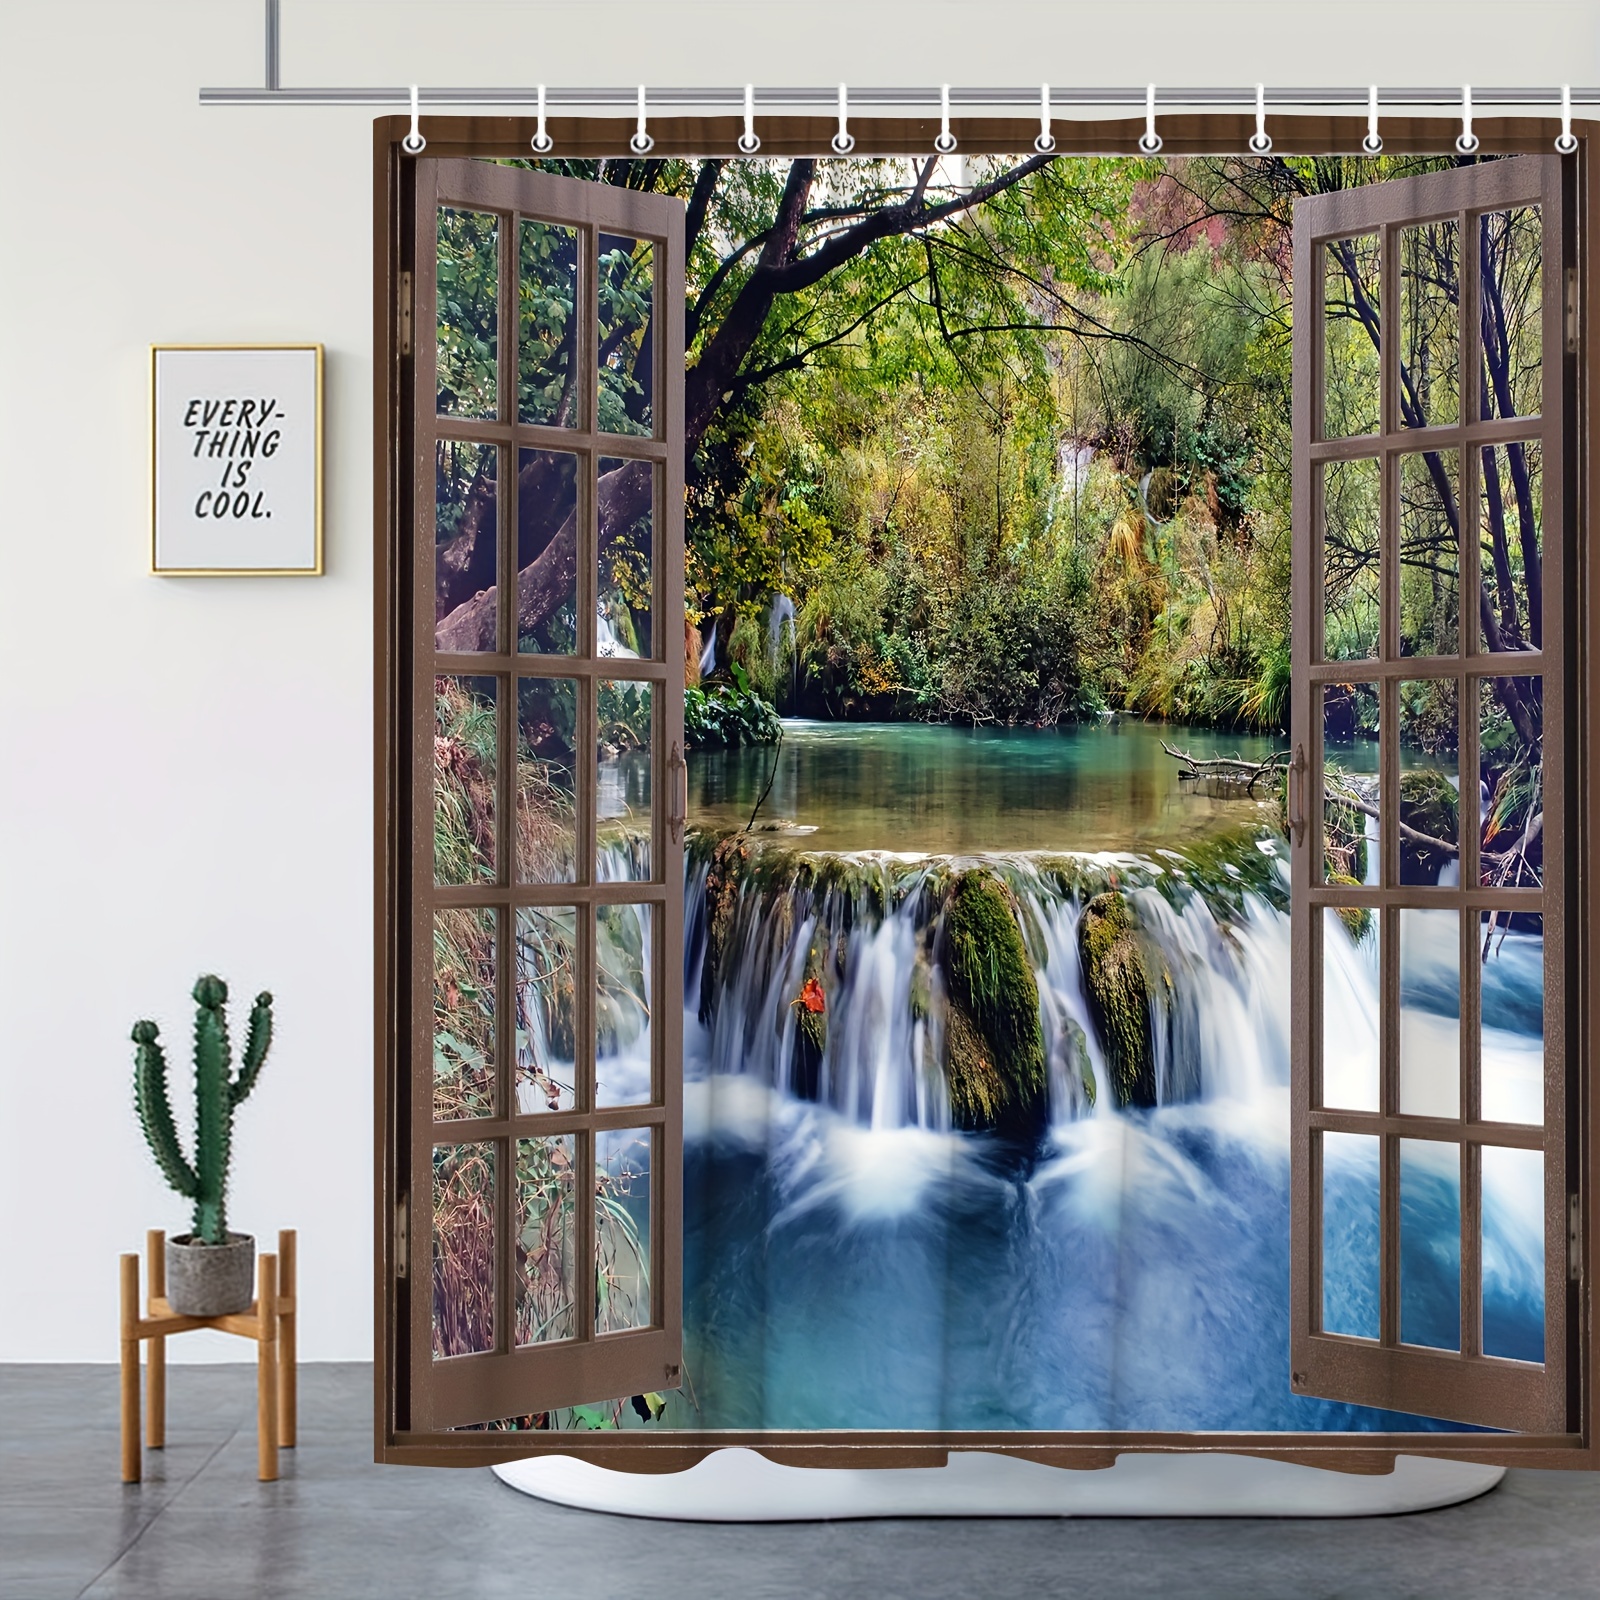 Shower Curtains Forest Landscape Waterfall Wild Tiger Spring Nature Scenery  Polyester Fabric Bathroom Curtain Decor With Hooks From Sophine12, $30.26